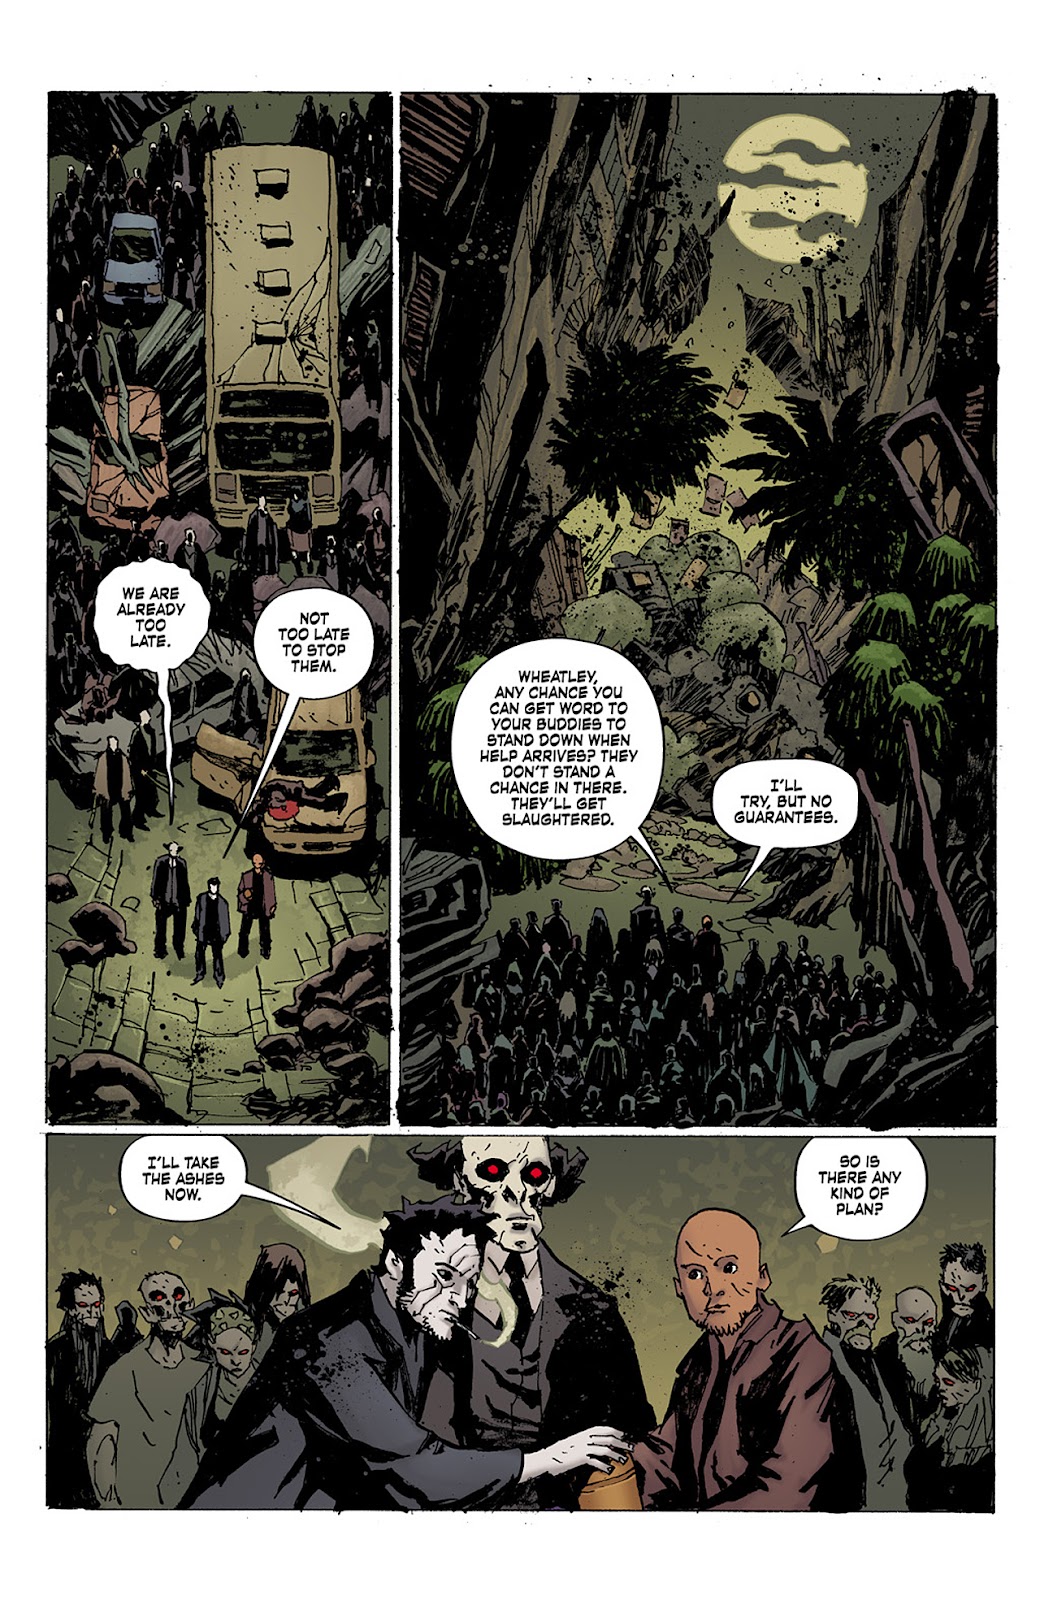 Criminal Macabre: Final Night - The 30 Days of Night Crossover issue 4 - Page 13